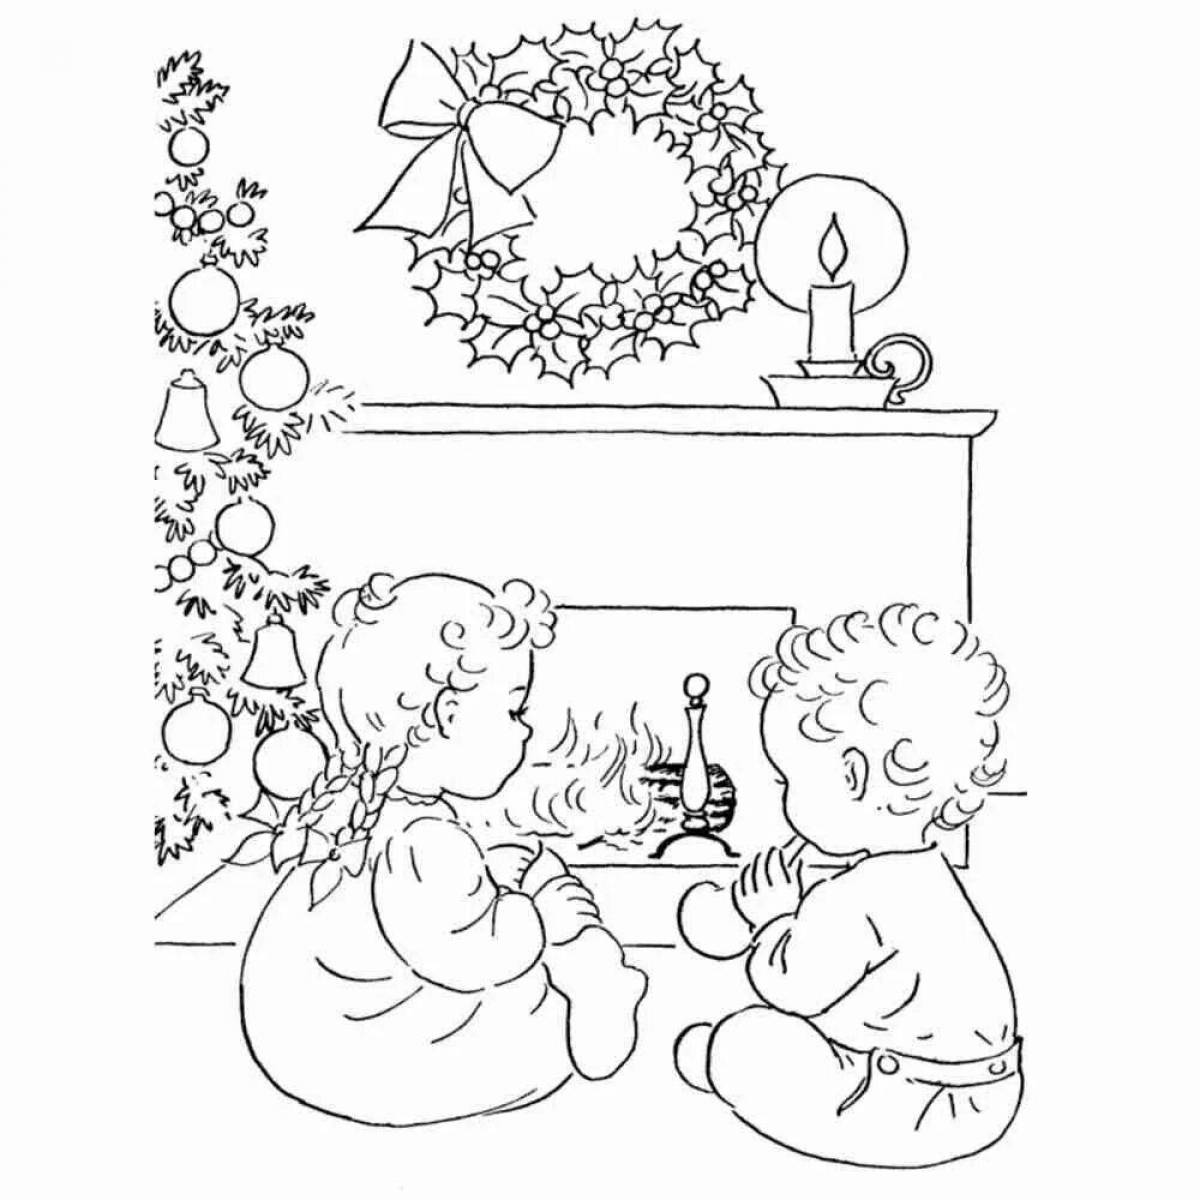 Children's Christmas bright coloring